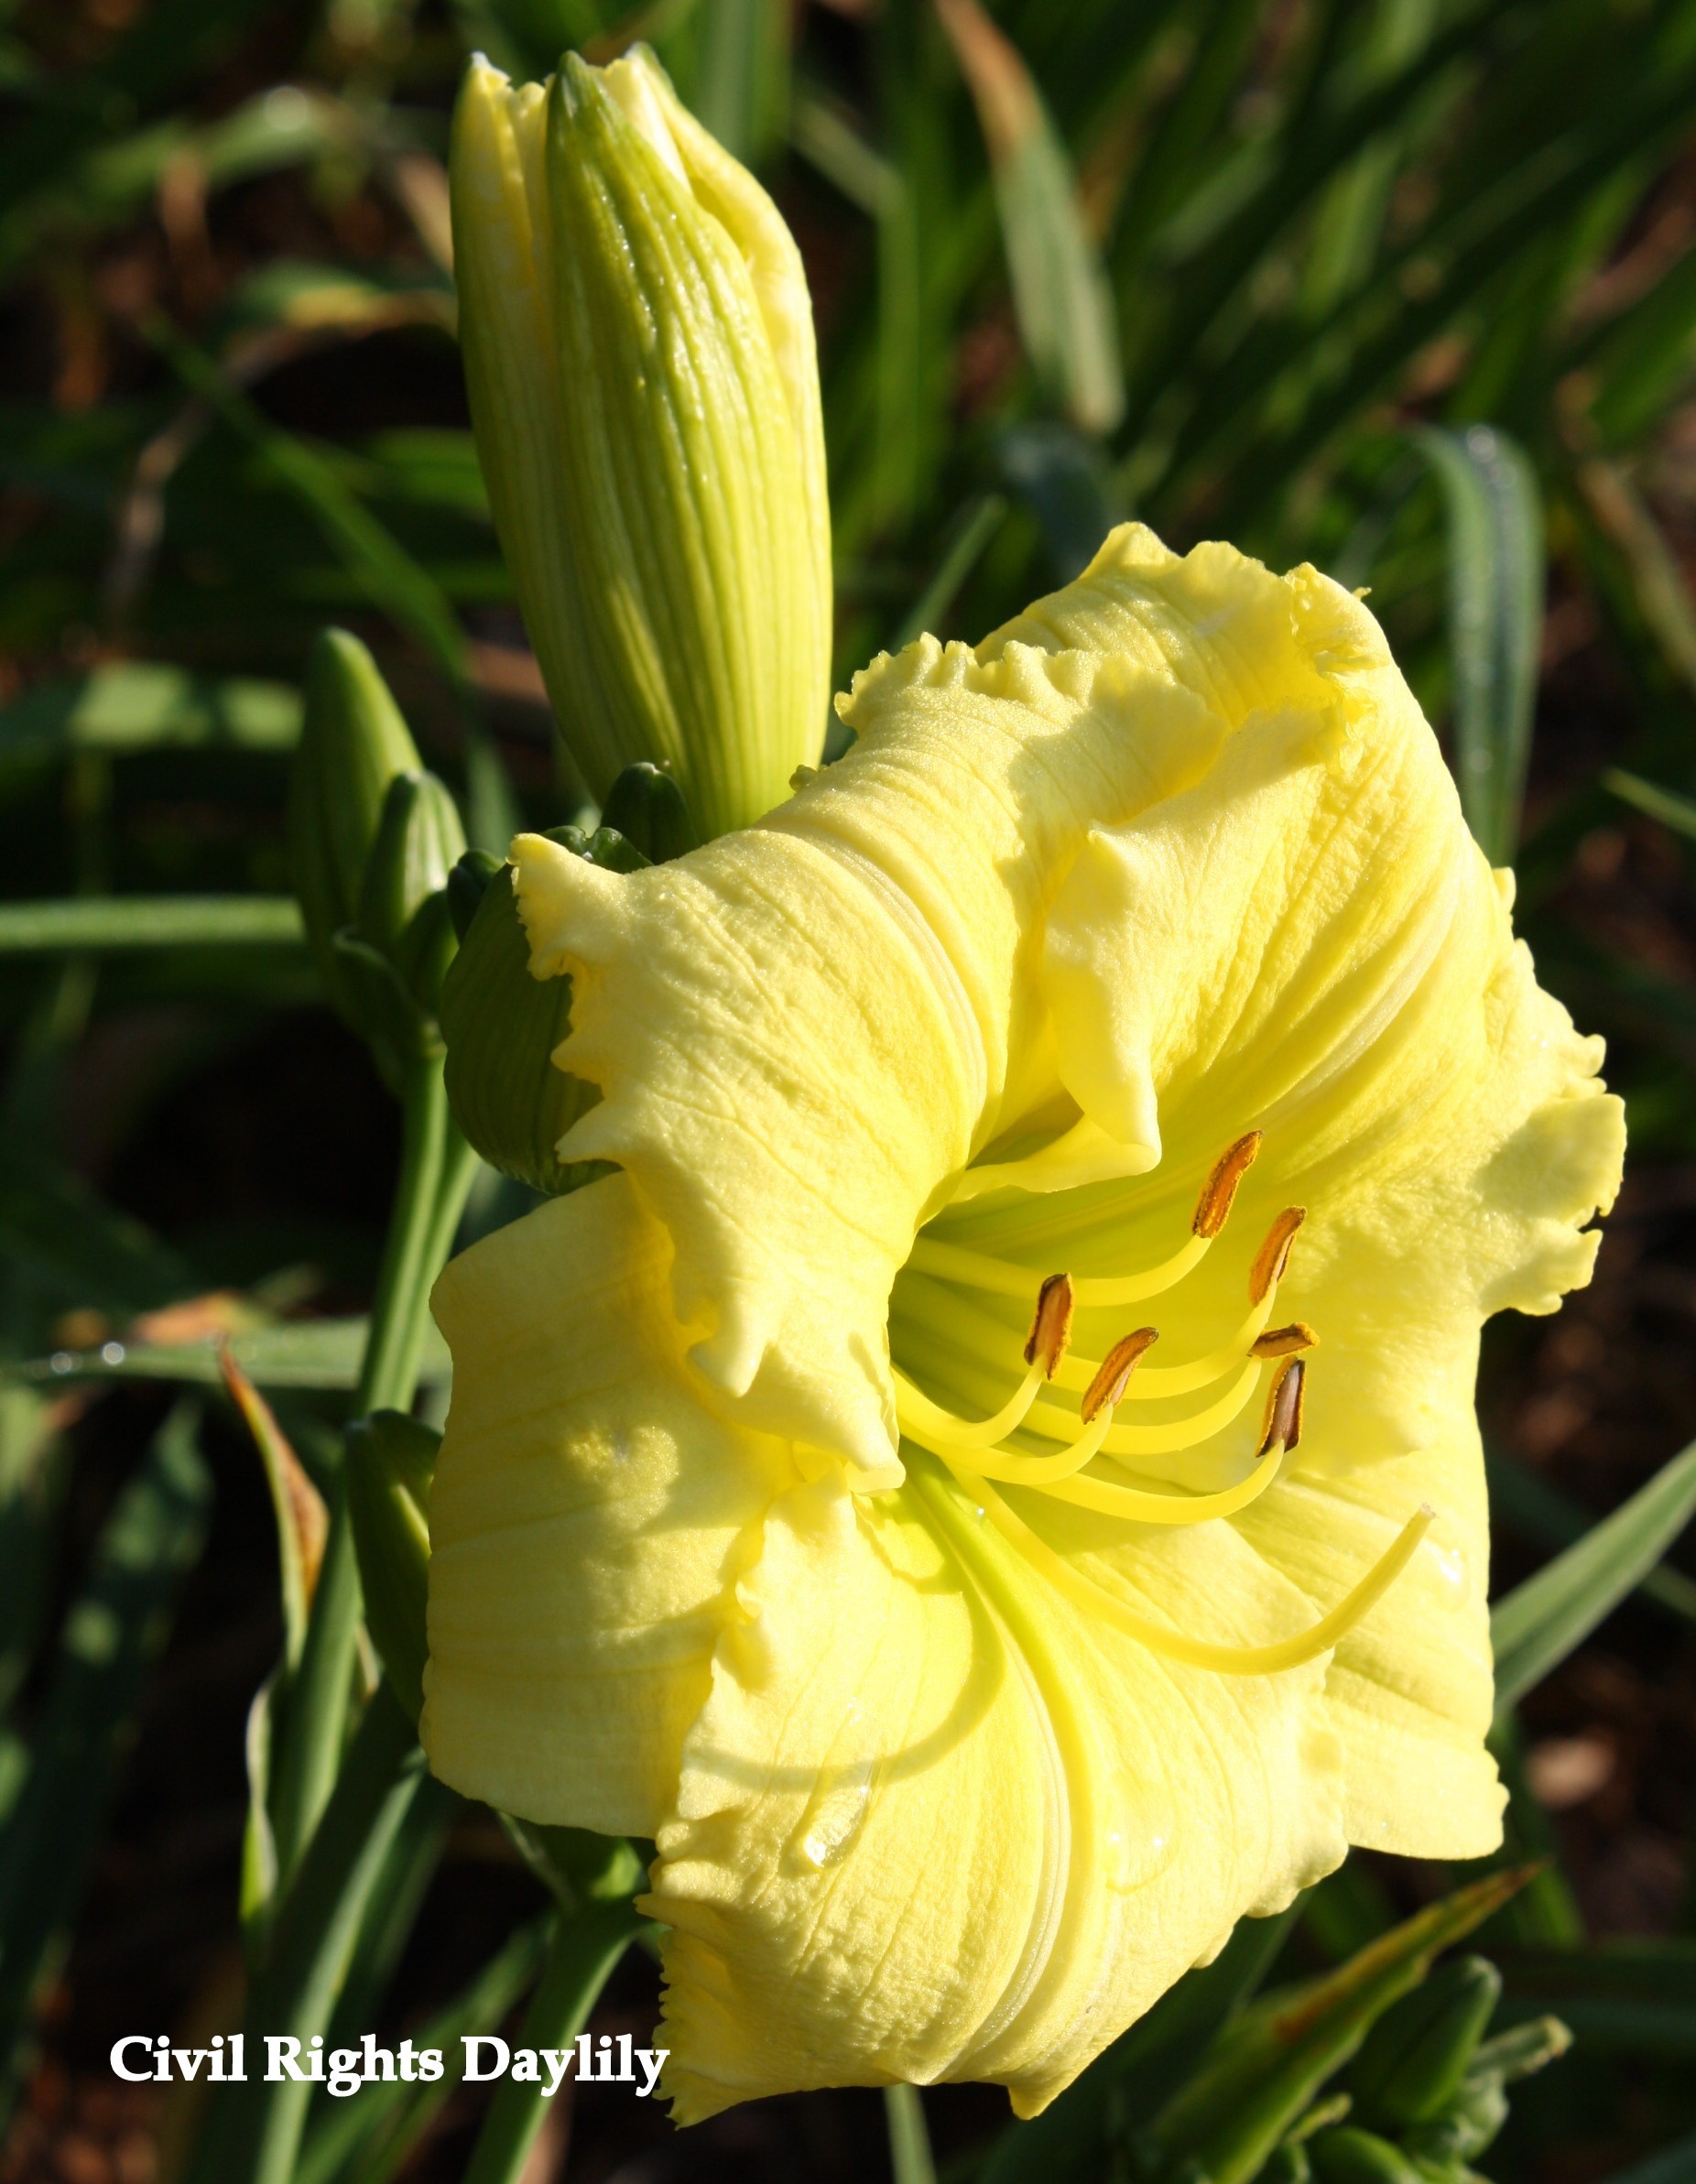 Civil Rights Daylily